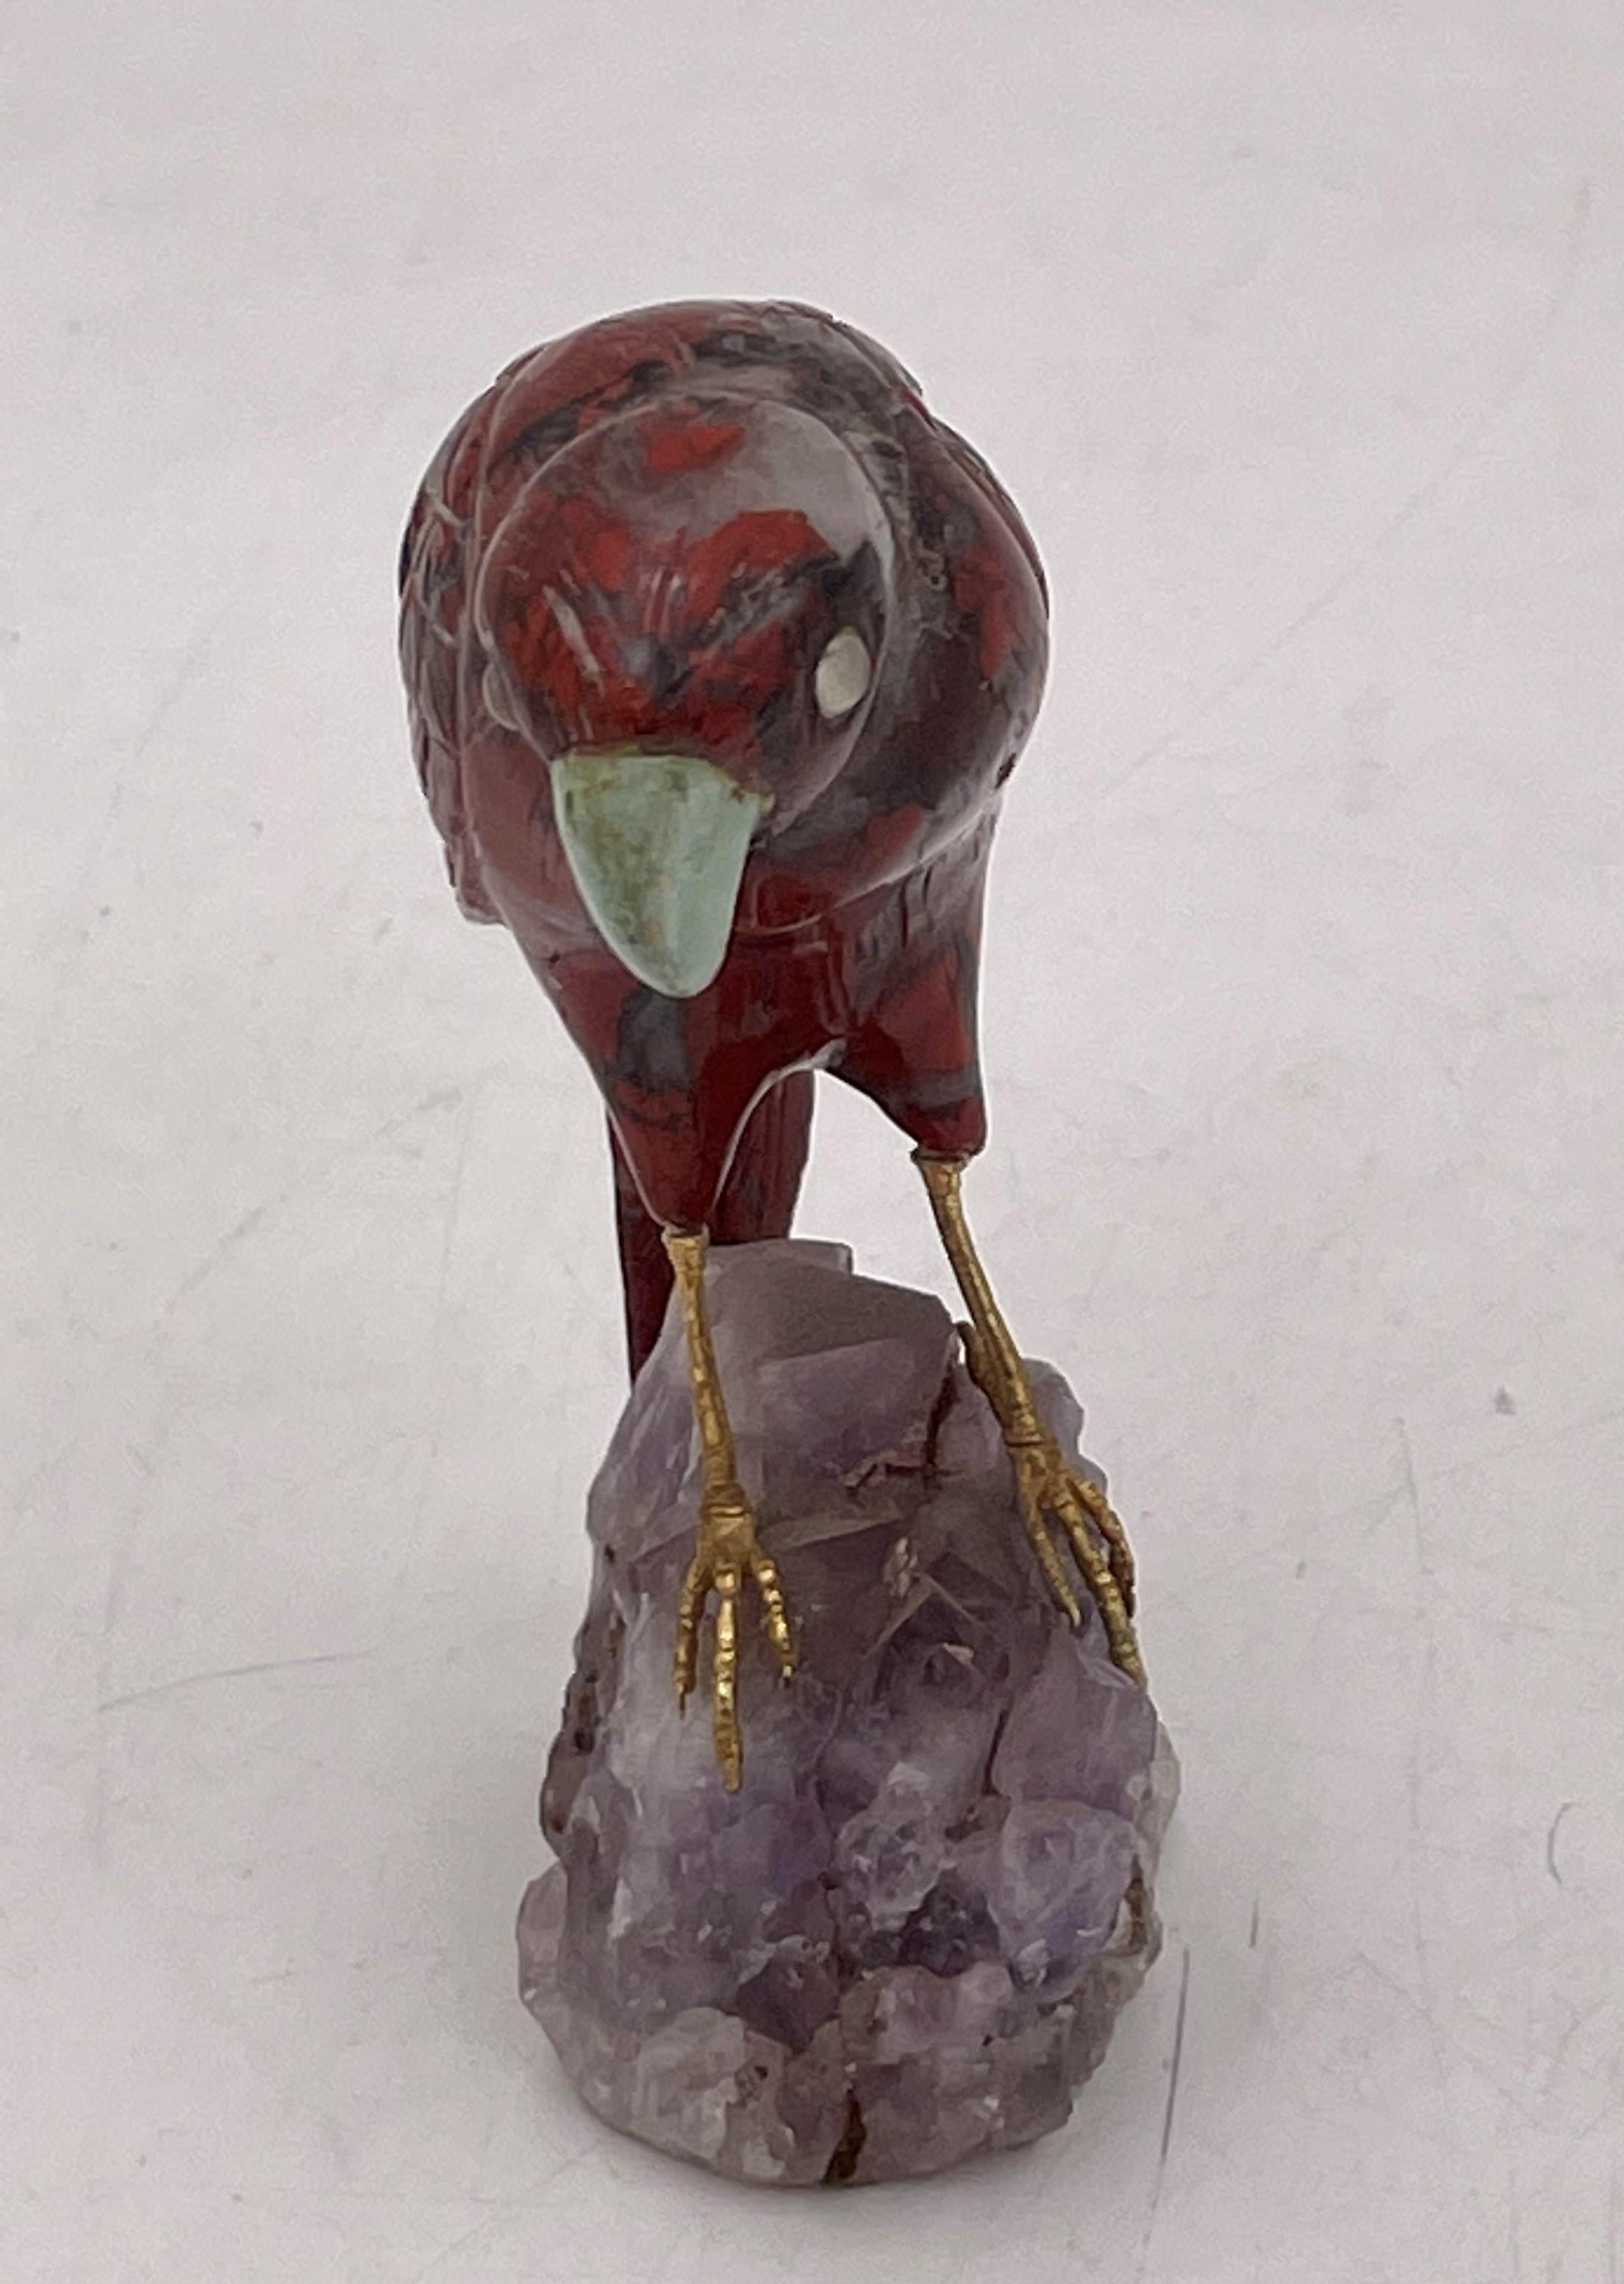 Highly realistic and detailed sculpture of a bird with gilt silver legs perched on an amethyst base. This beautiful piece measures 3 7/8'' in height by 2 3/4'' in depth by 1 1/2'' in width.

We hand polish all items before shipping them out, but